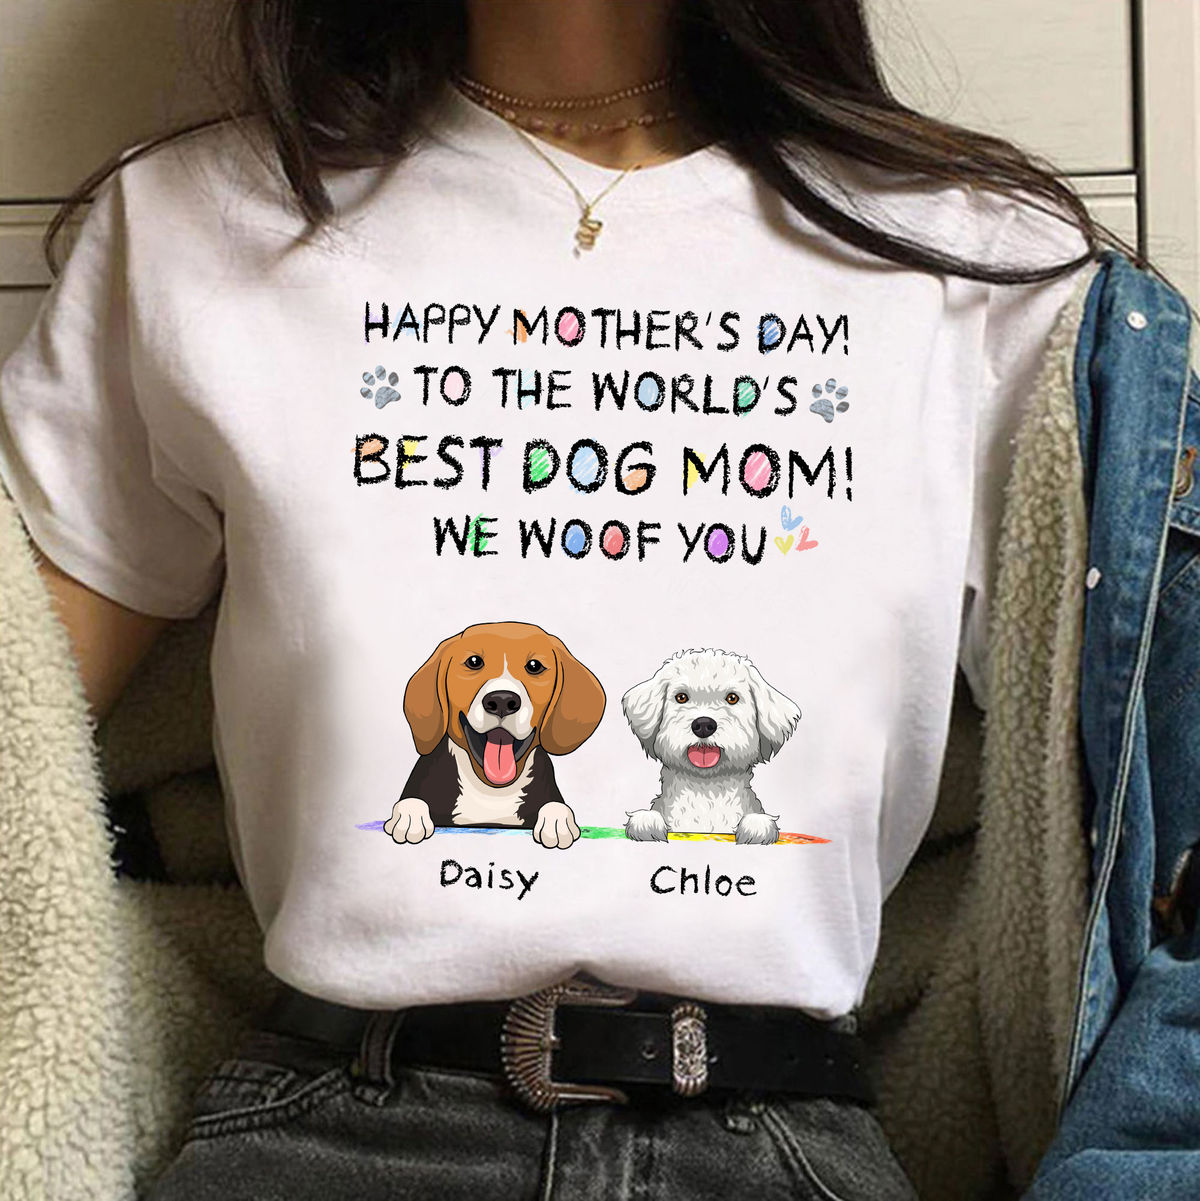 Personalized Shirt - Dog Mom Shirt - Happy Mother's Day to the world's Best Dog Mom - We Woof You - Mother's Day Gifts, Gifts For Mother_1